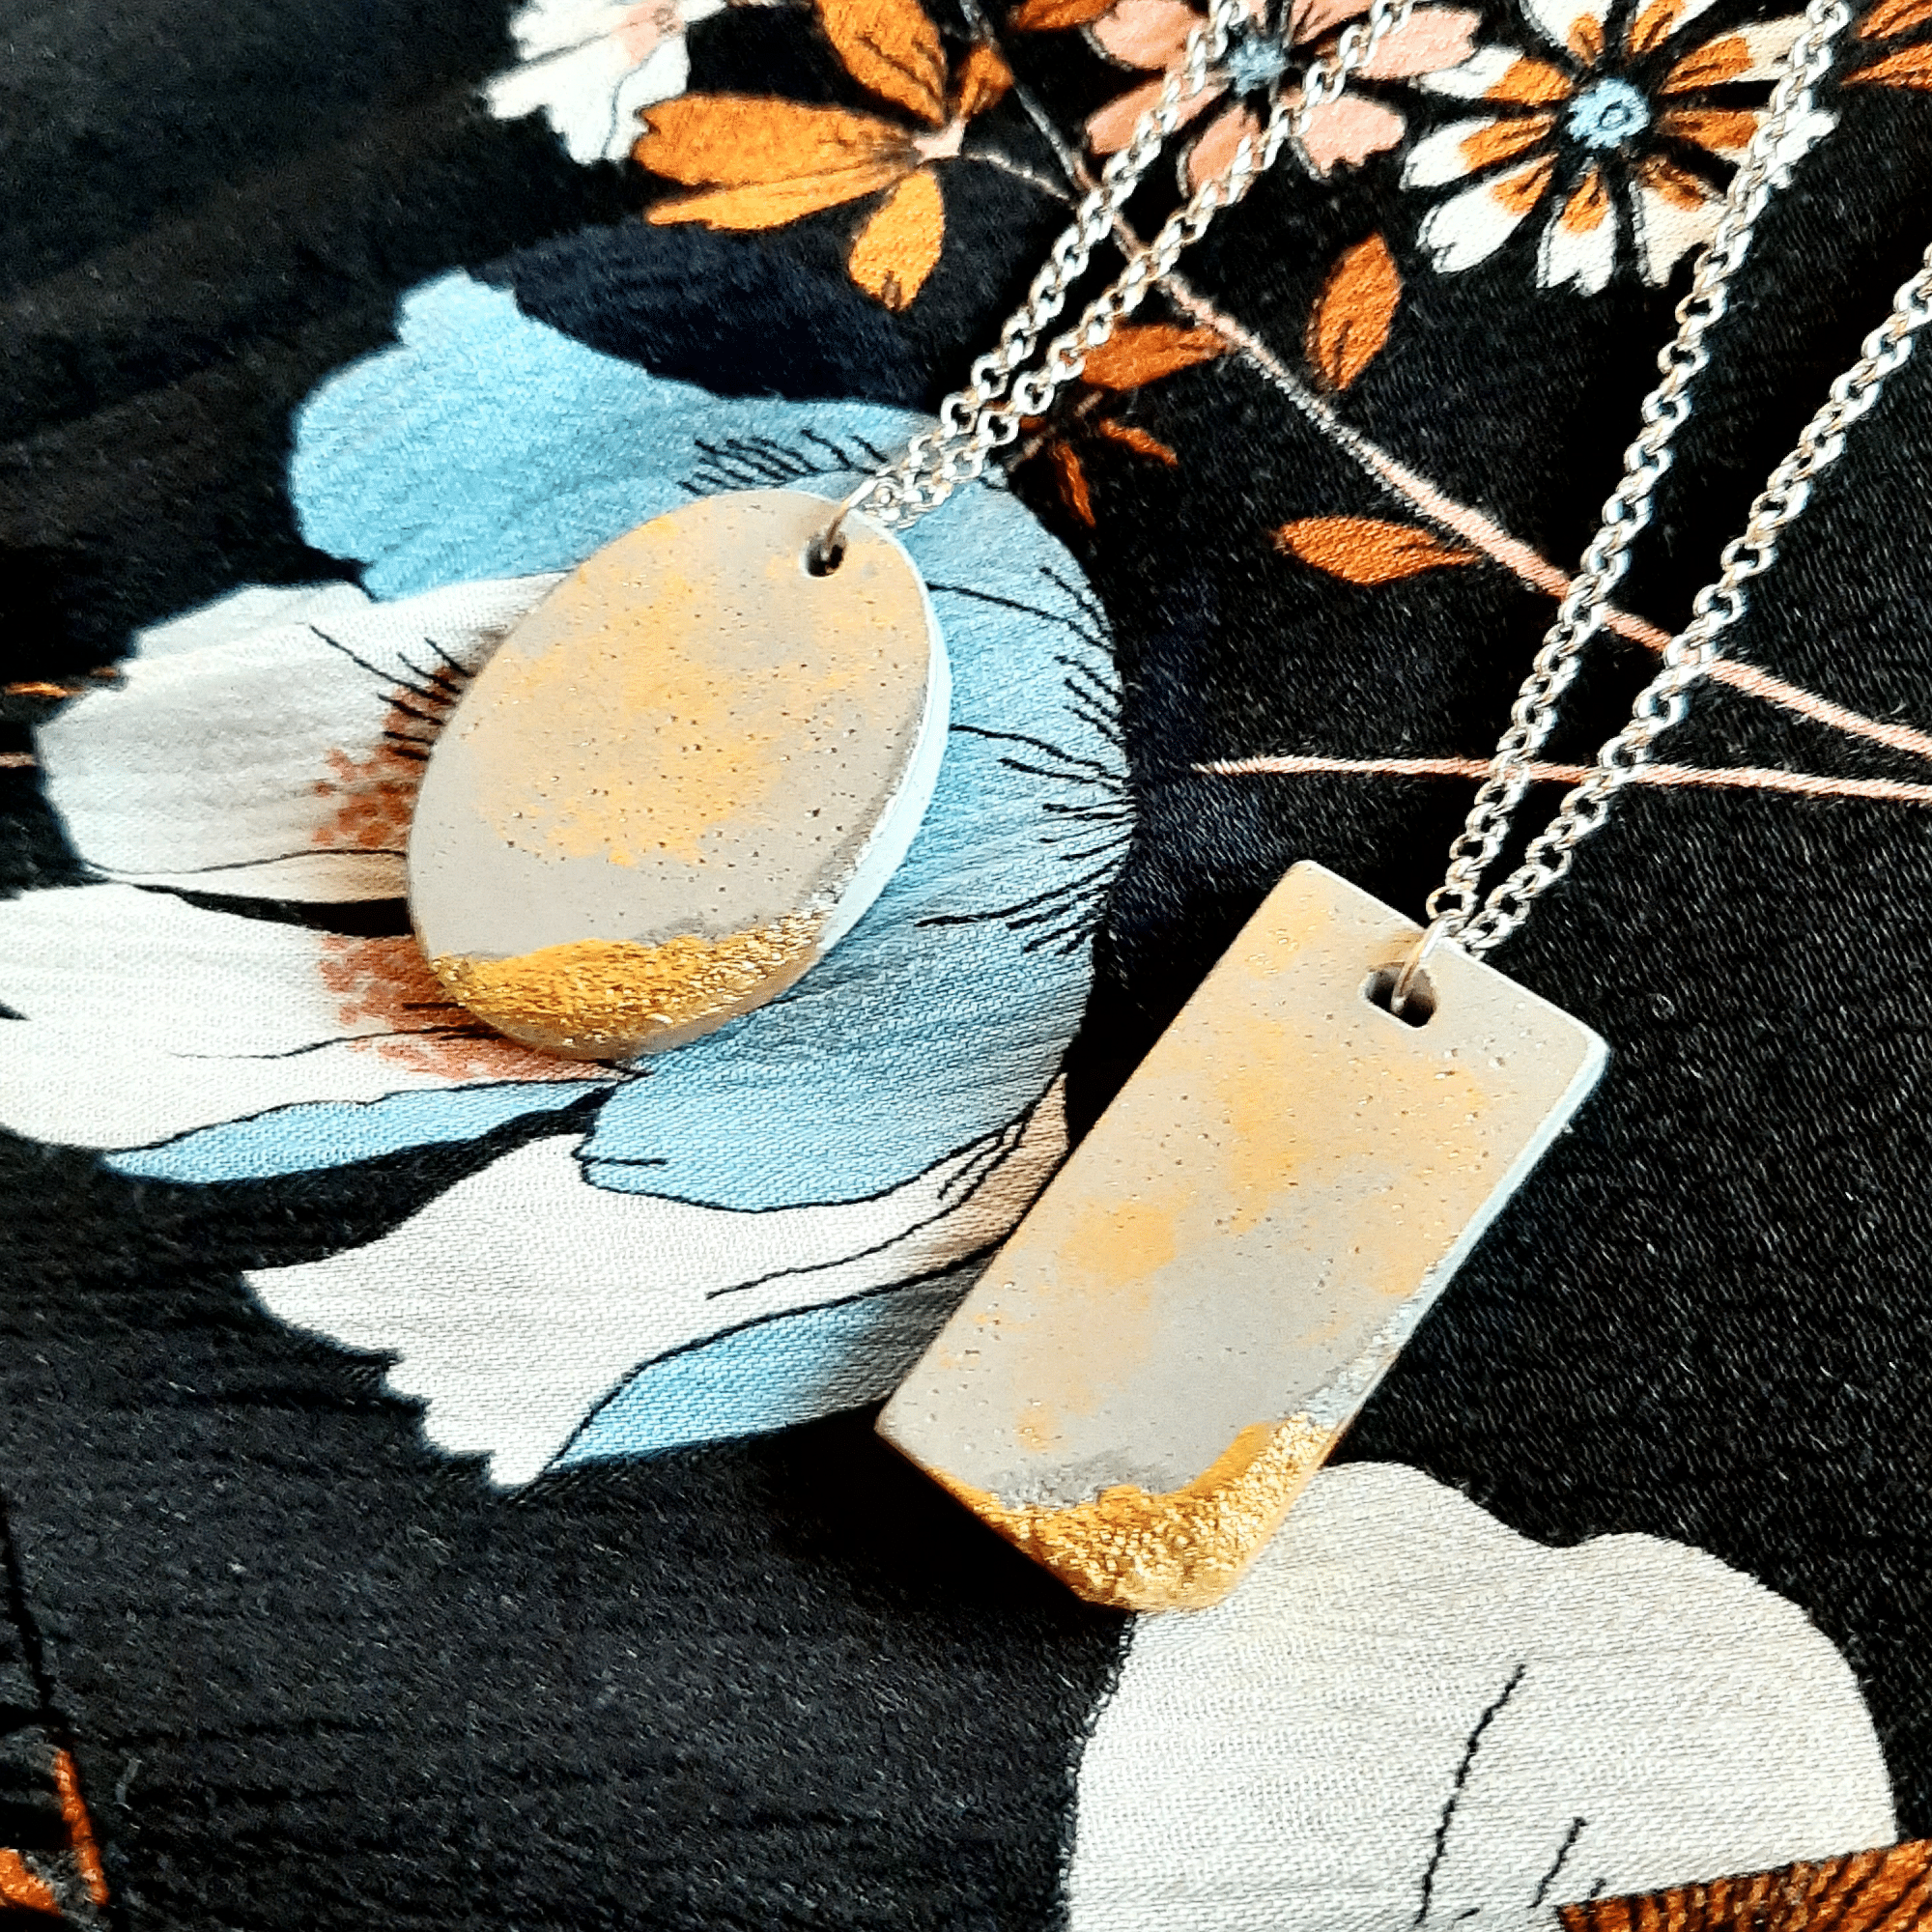 Handmade Minimalist Style Concrete Gold Smudged Pendant Necklace Necklaces A Moment Of Now Women’s Boutique Clothing Online Lifestyle Store